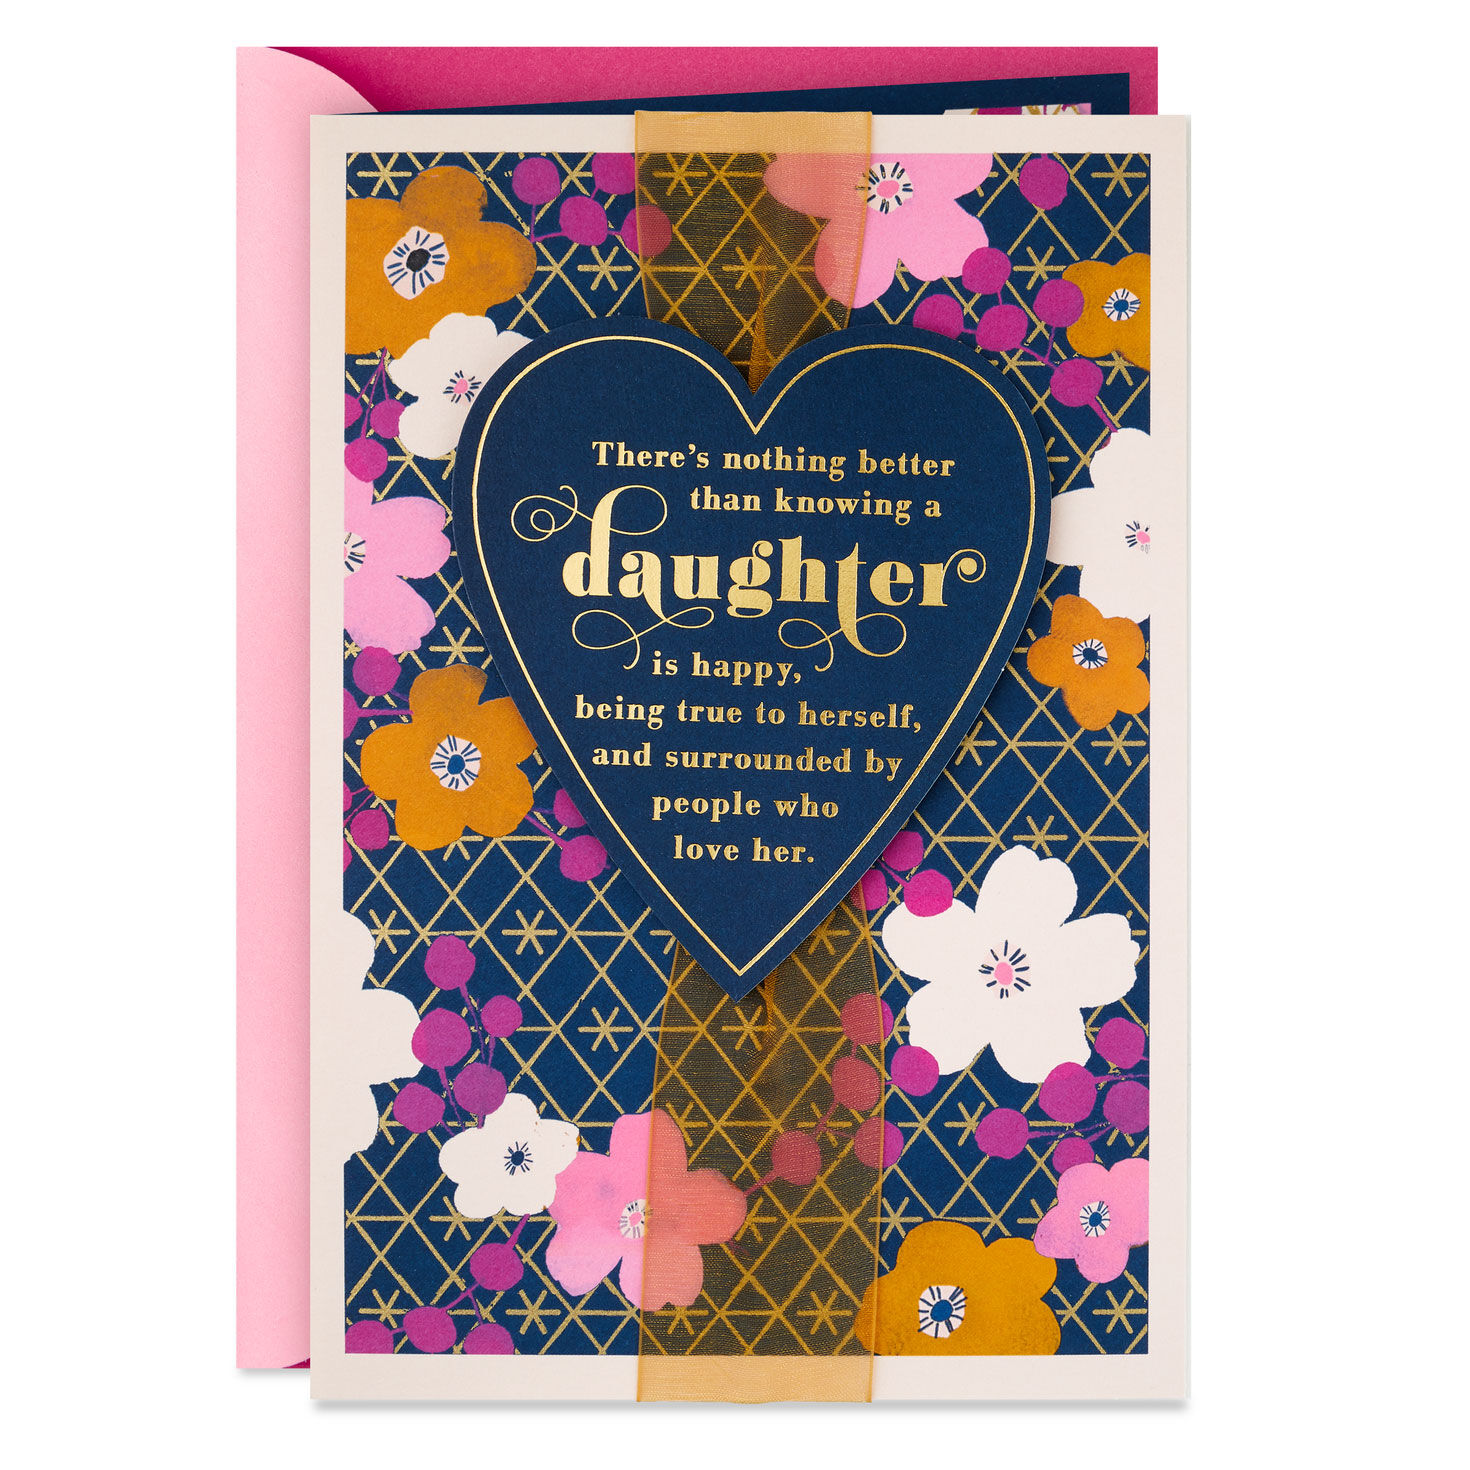 Proud of the Woman You've Become Birthday Card for Daughter for only USD 6.99 | Hallmark